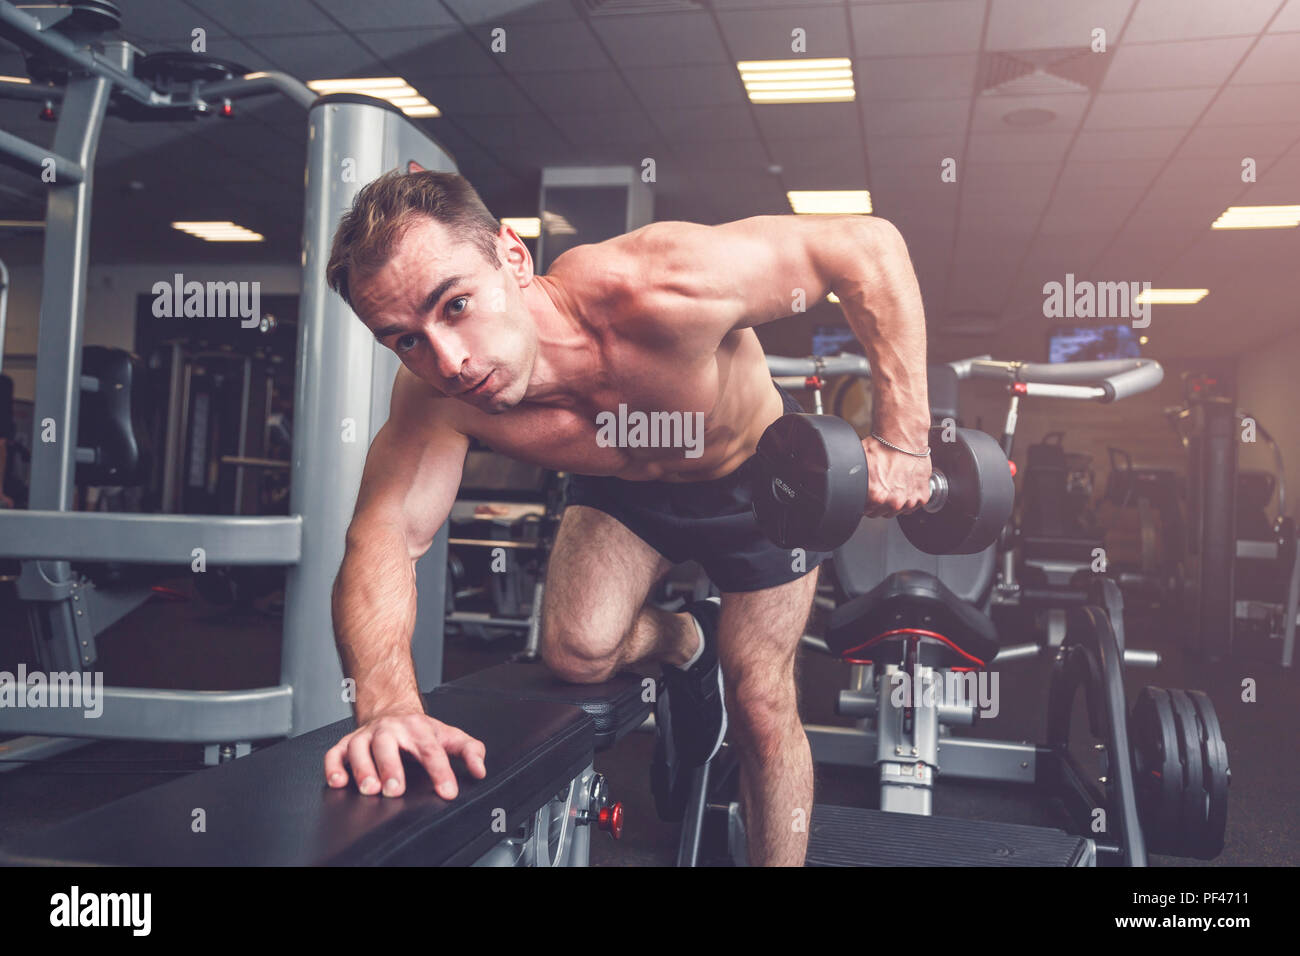 Sportsman doing dumbbell rows on bench at gym. Stock Photo